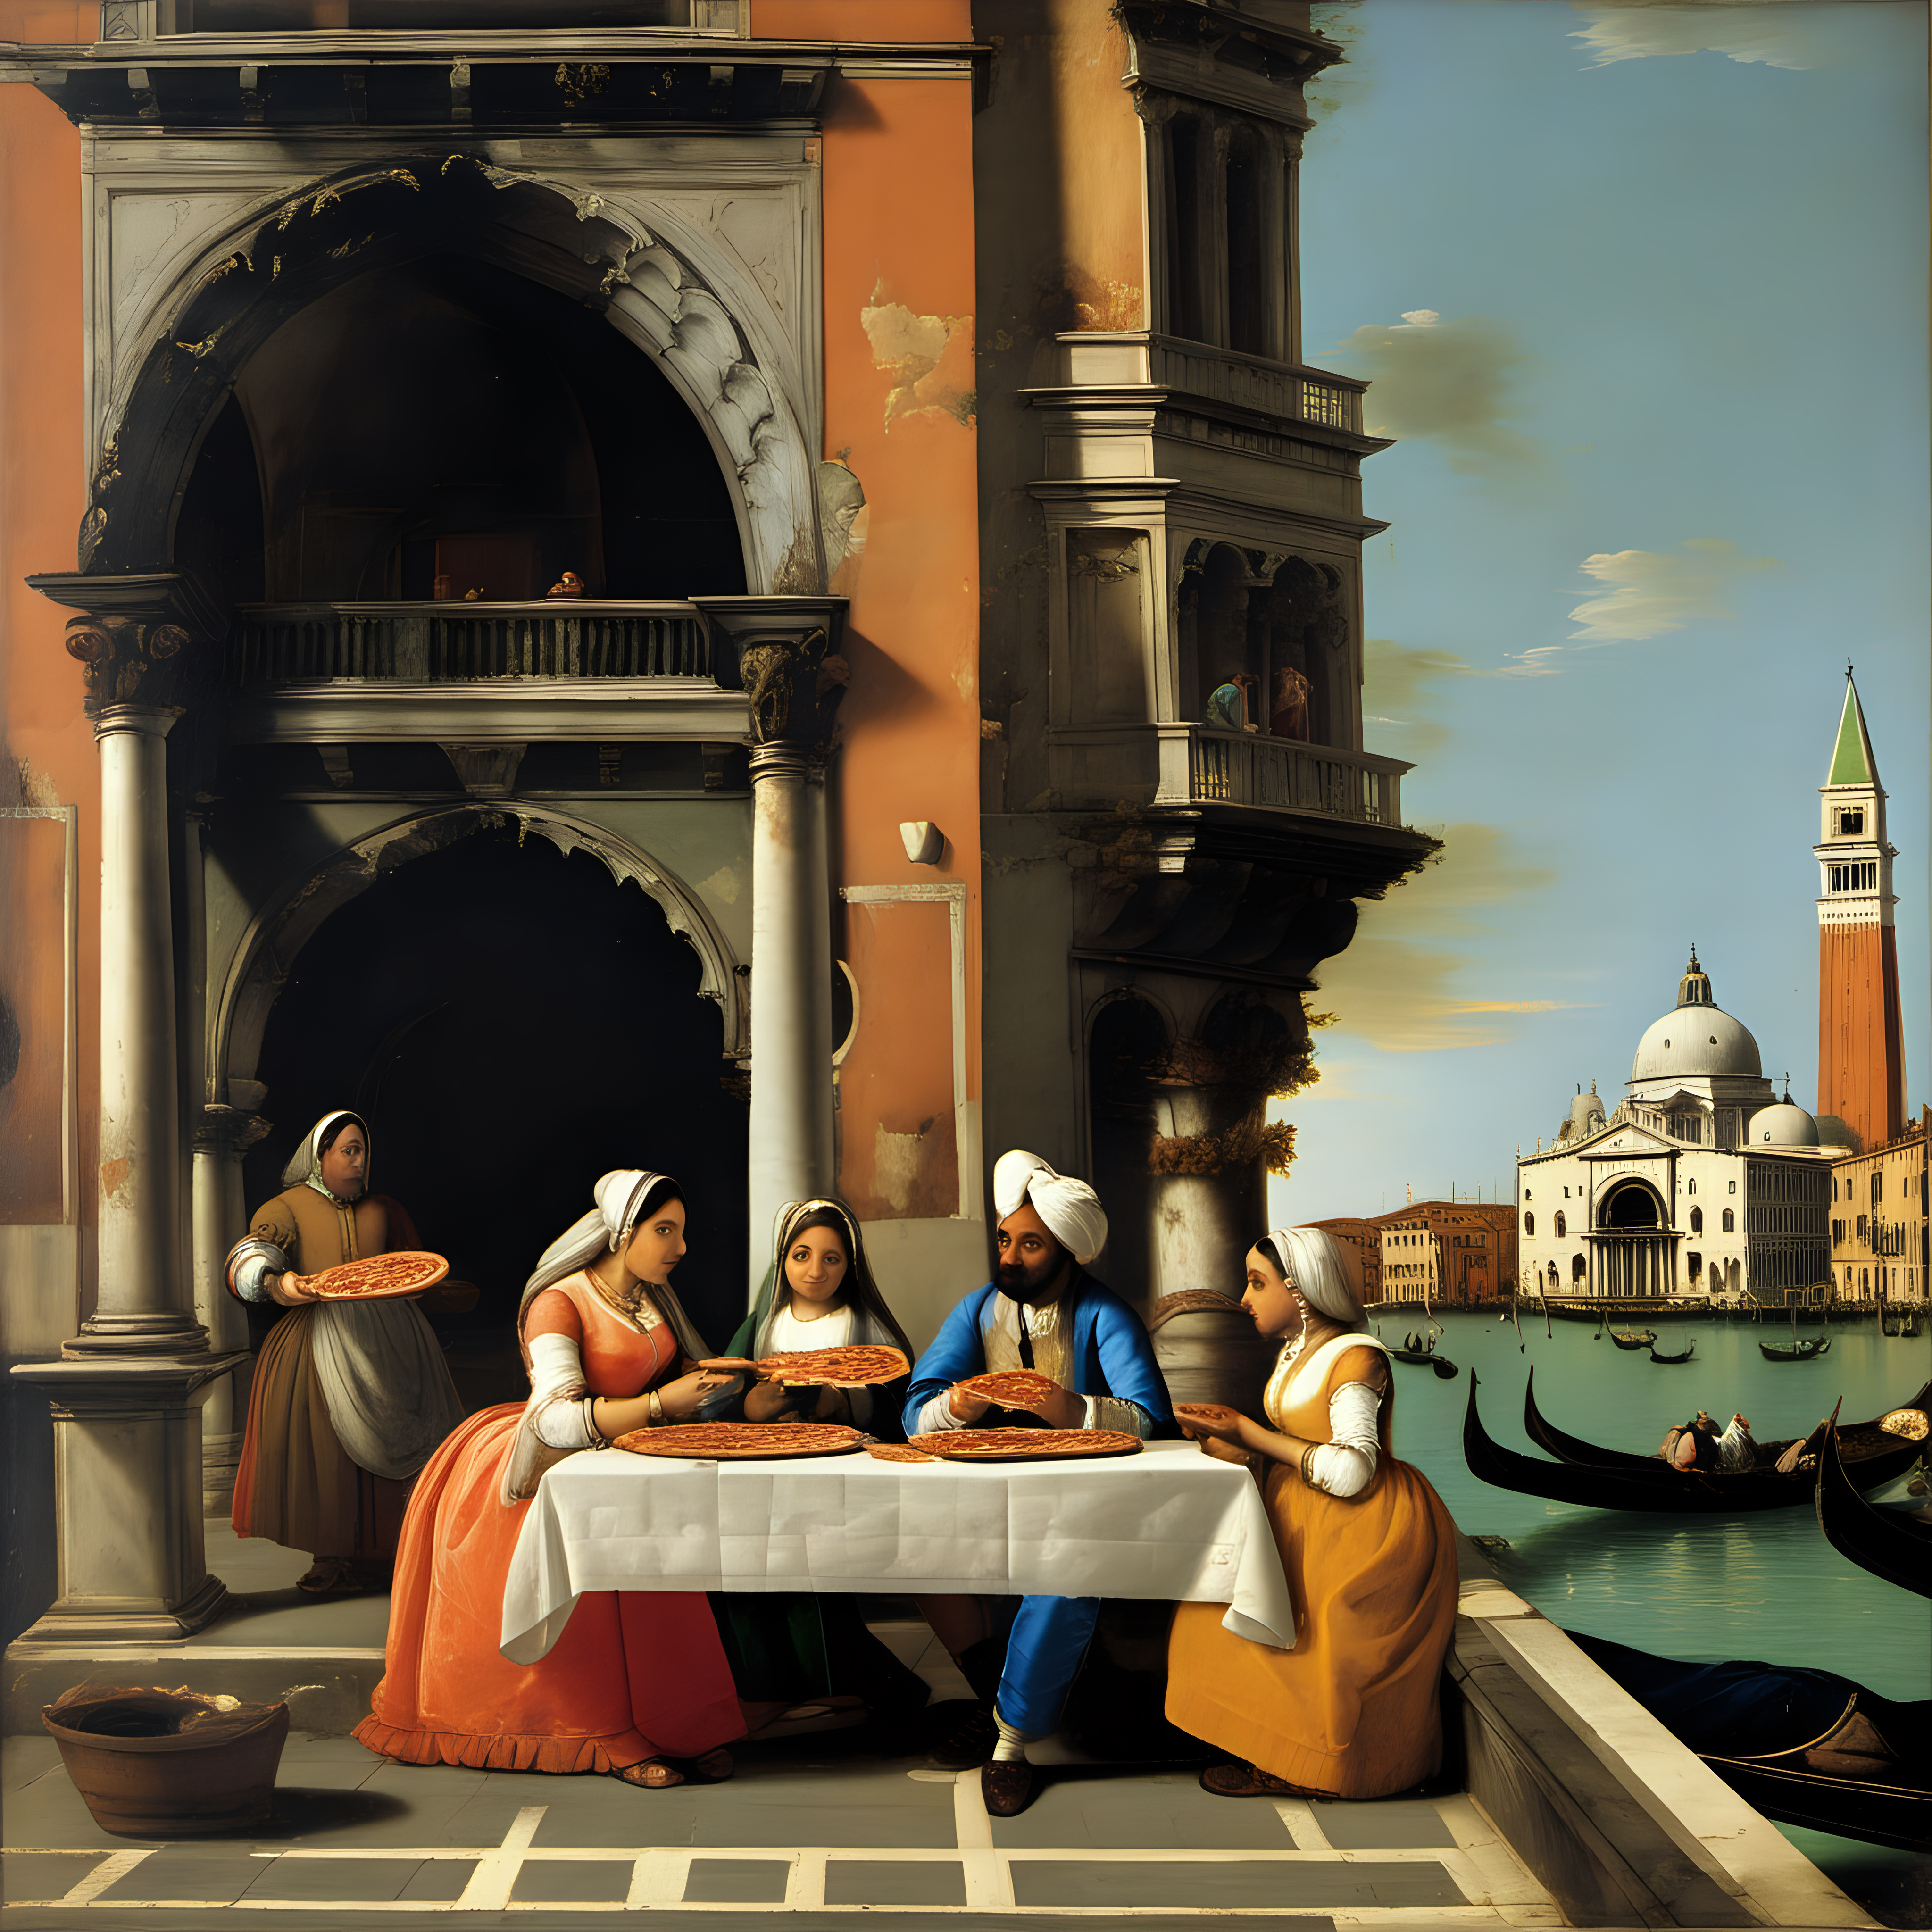 Indian parents and their two daughters eating pizza in Venice, Giovanni Antonio Canal (Canaletto) oil painting